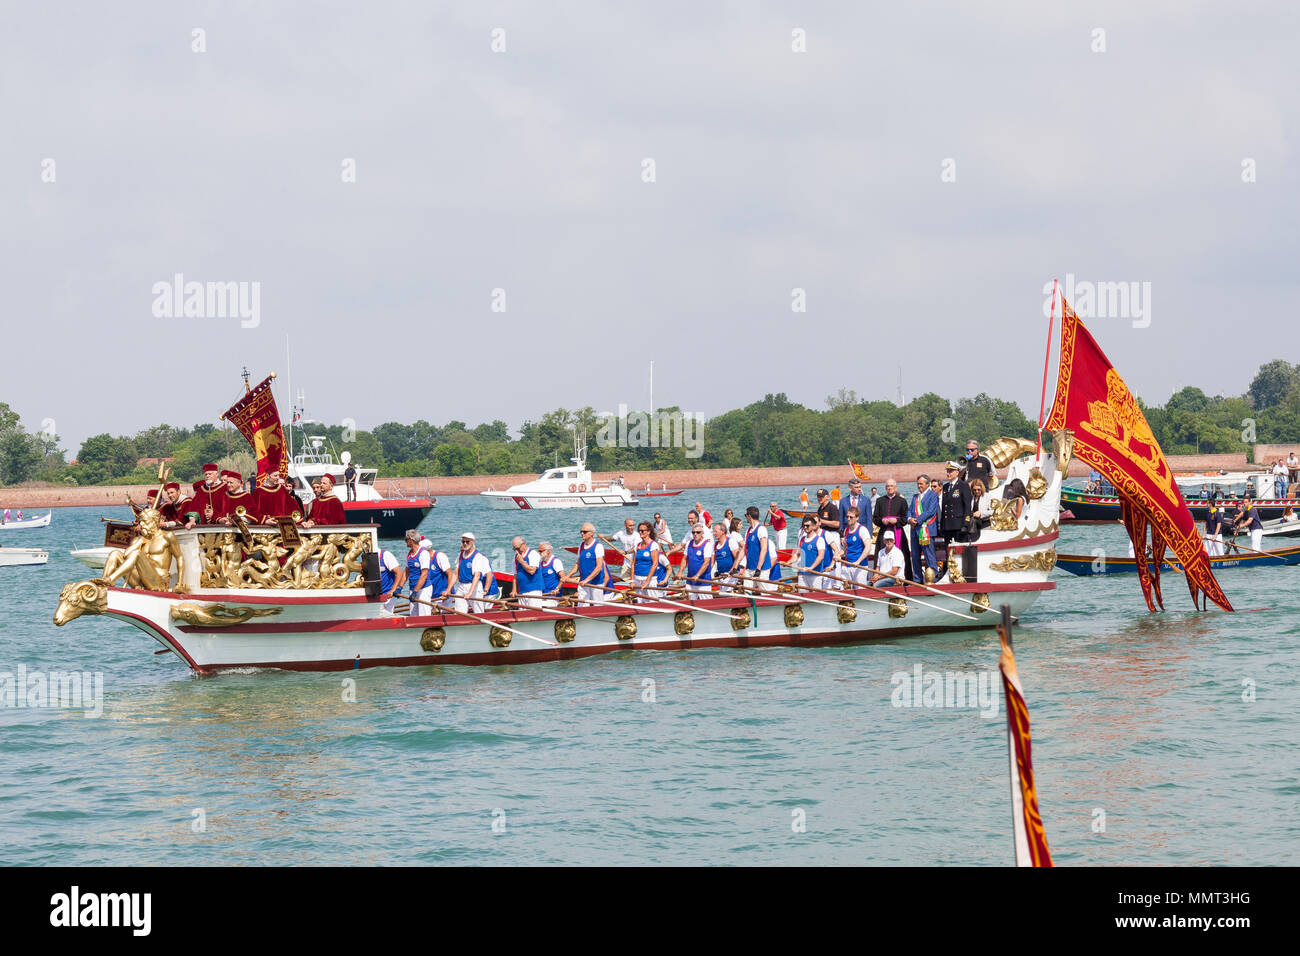 Venice, Veneto, Italy.  13th May 2018.  The Serenissama ceremonial boat with the dignatories Mayor Brugnaro, The Head of the Navy  and Patriarch of Venice,  at Lido during the Festa de la Sensa for the blessing of the gold ring which is then tossed into the lagoon marrying Venice to the sea. Credit Mary Clarke/Alamy Live News Stock Photo